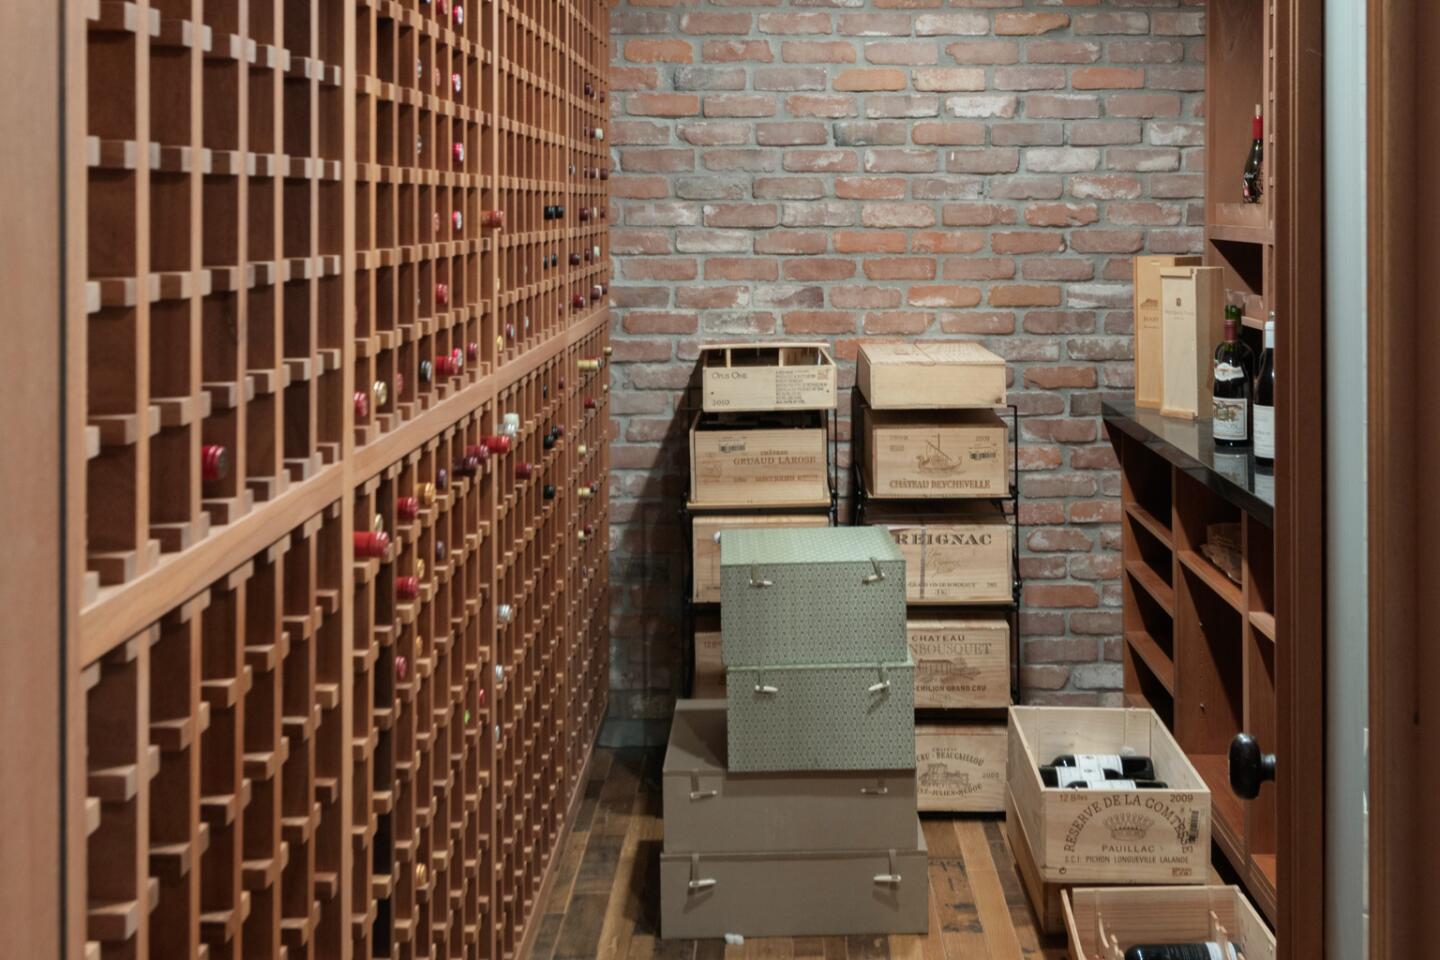 Wine racks cover one wall and brick another.